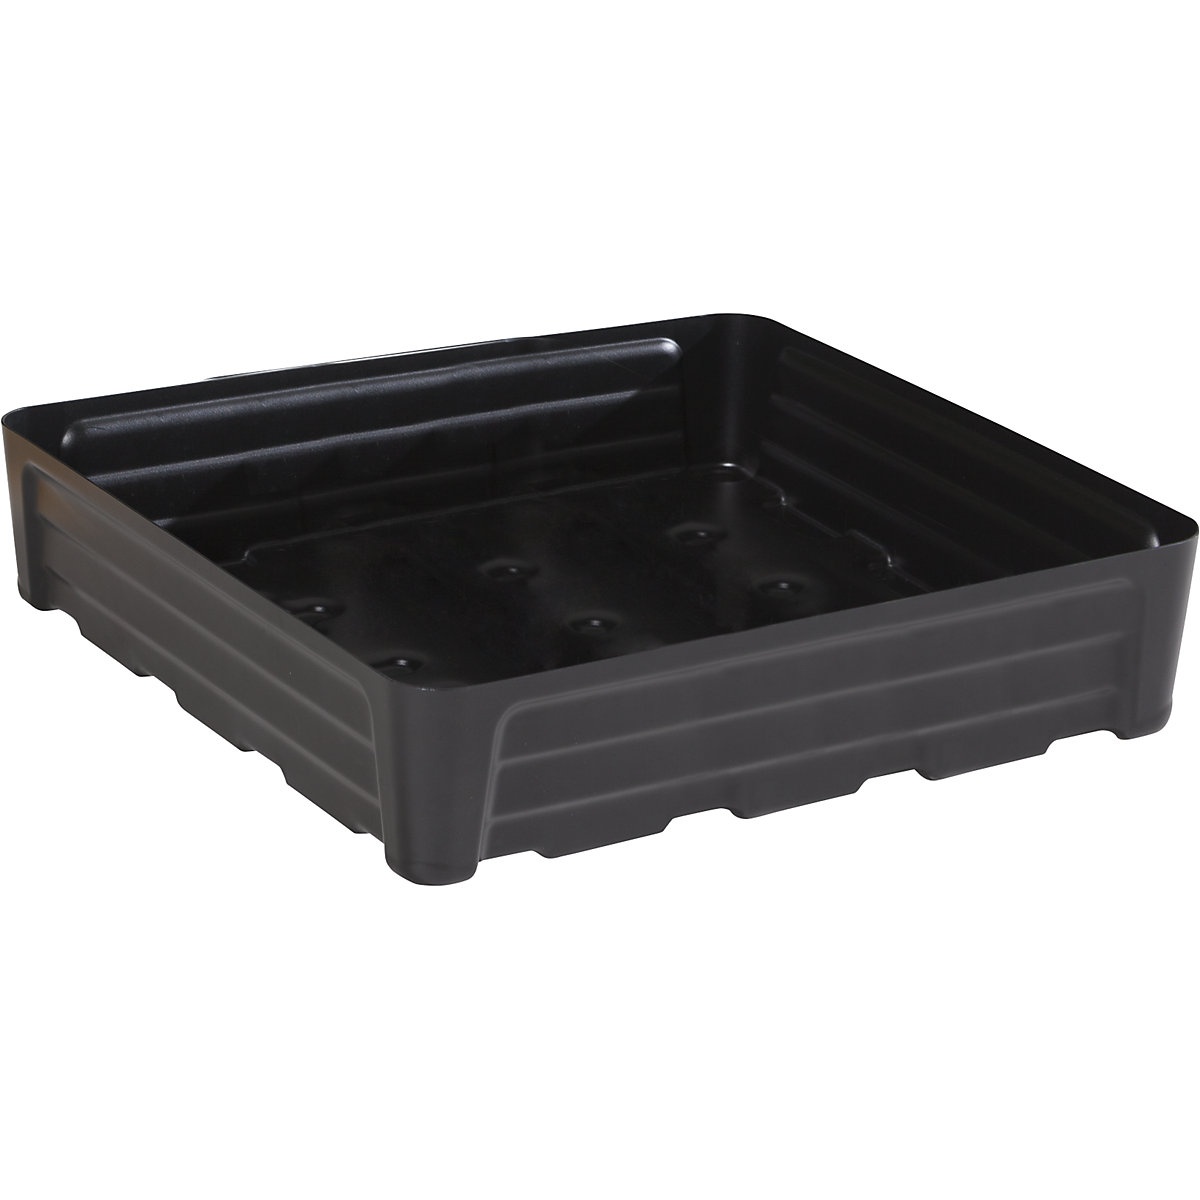 PE sump tray for small containers – eurokraft pro, without grate, collection capacity 80 l-3